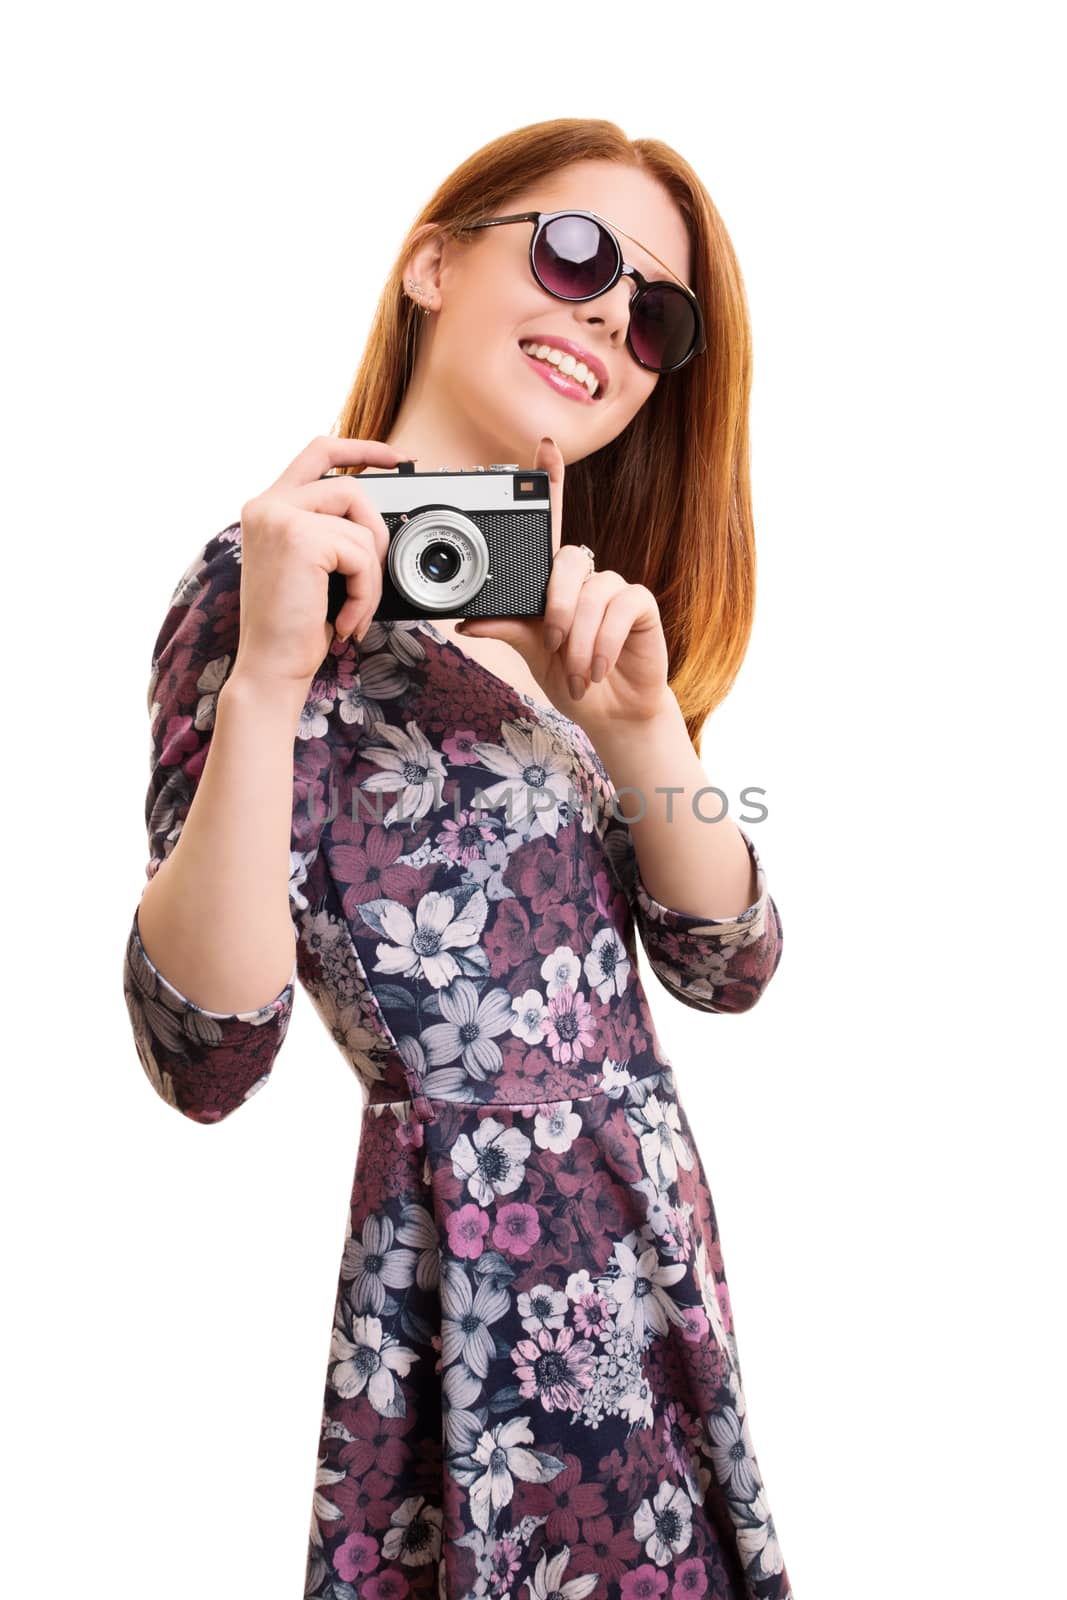 Beautiful young girl taking a photo by Mendelex